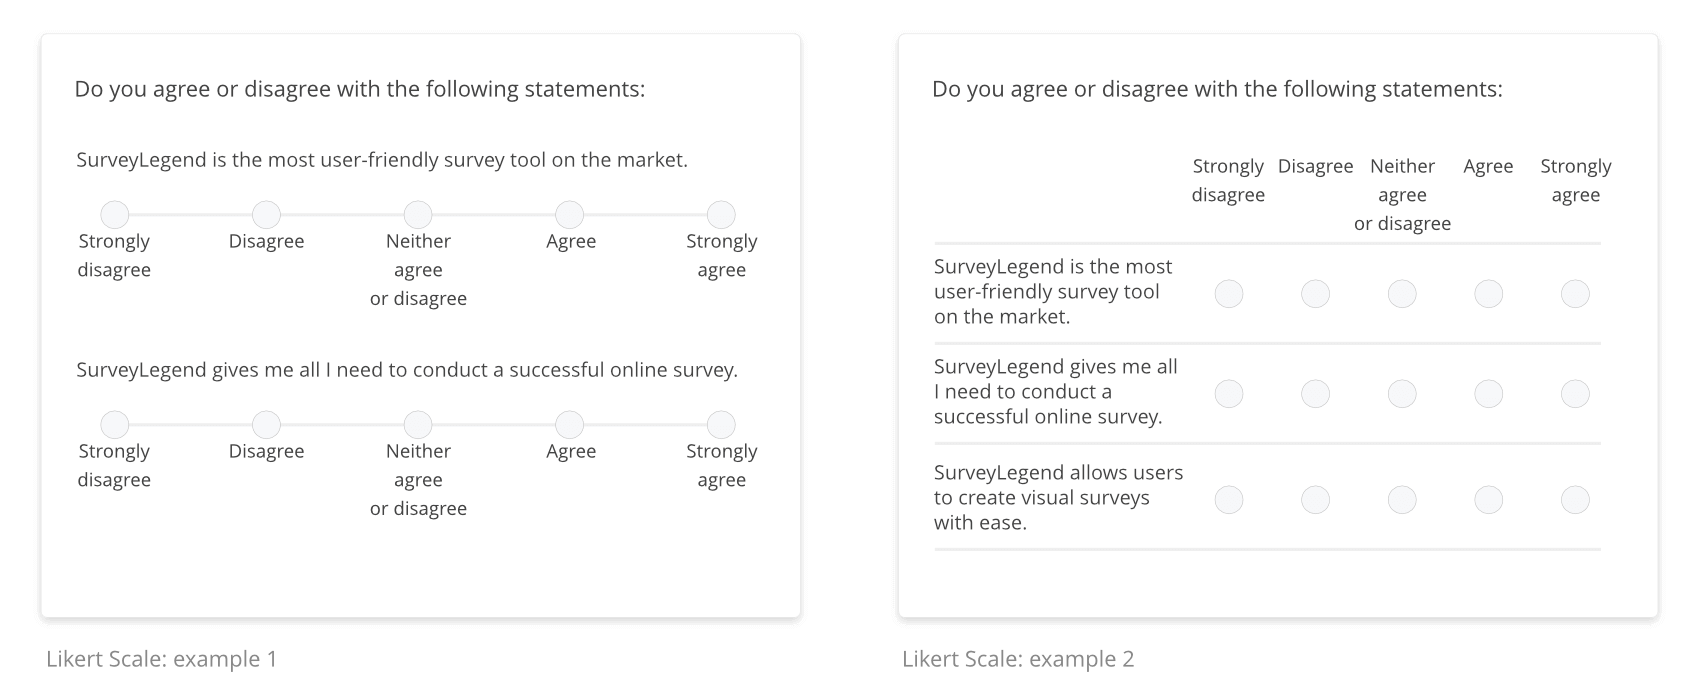 These are examples of Likert Scale. Likert Scale could look visually different.